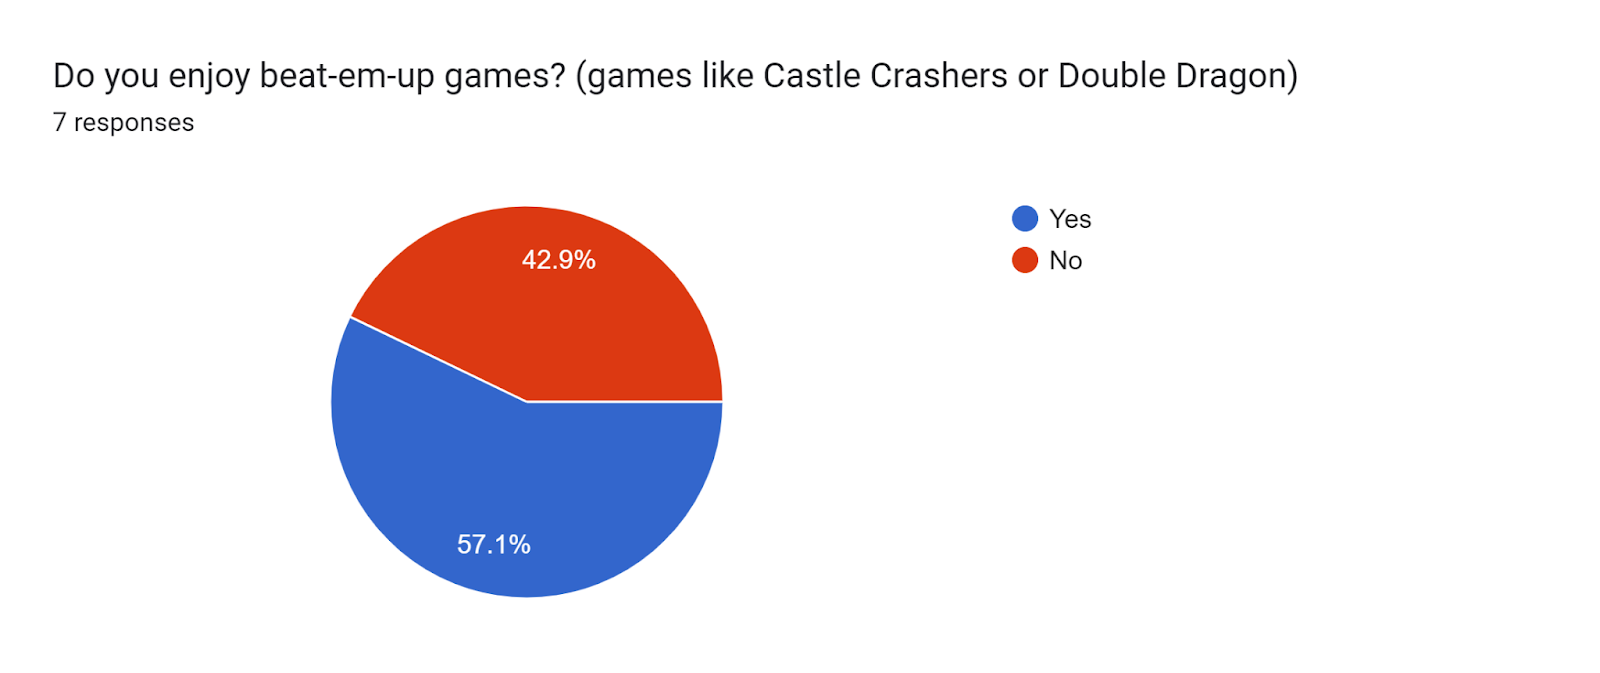 Forms response chart. Question title: Do you enjoy beat-em-up games? (games like Castle Crashers or Double Dragon). Number of responses: 7 responses.